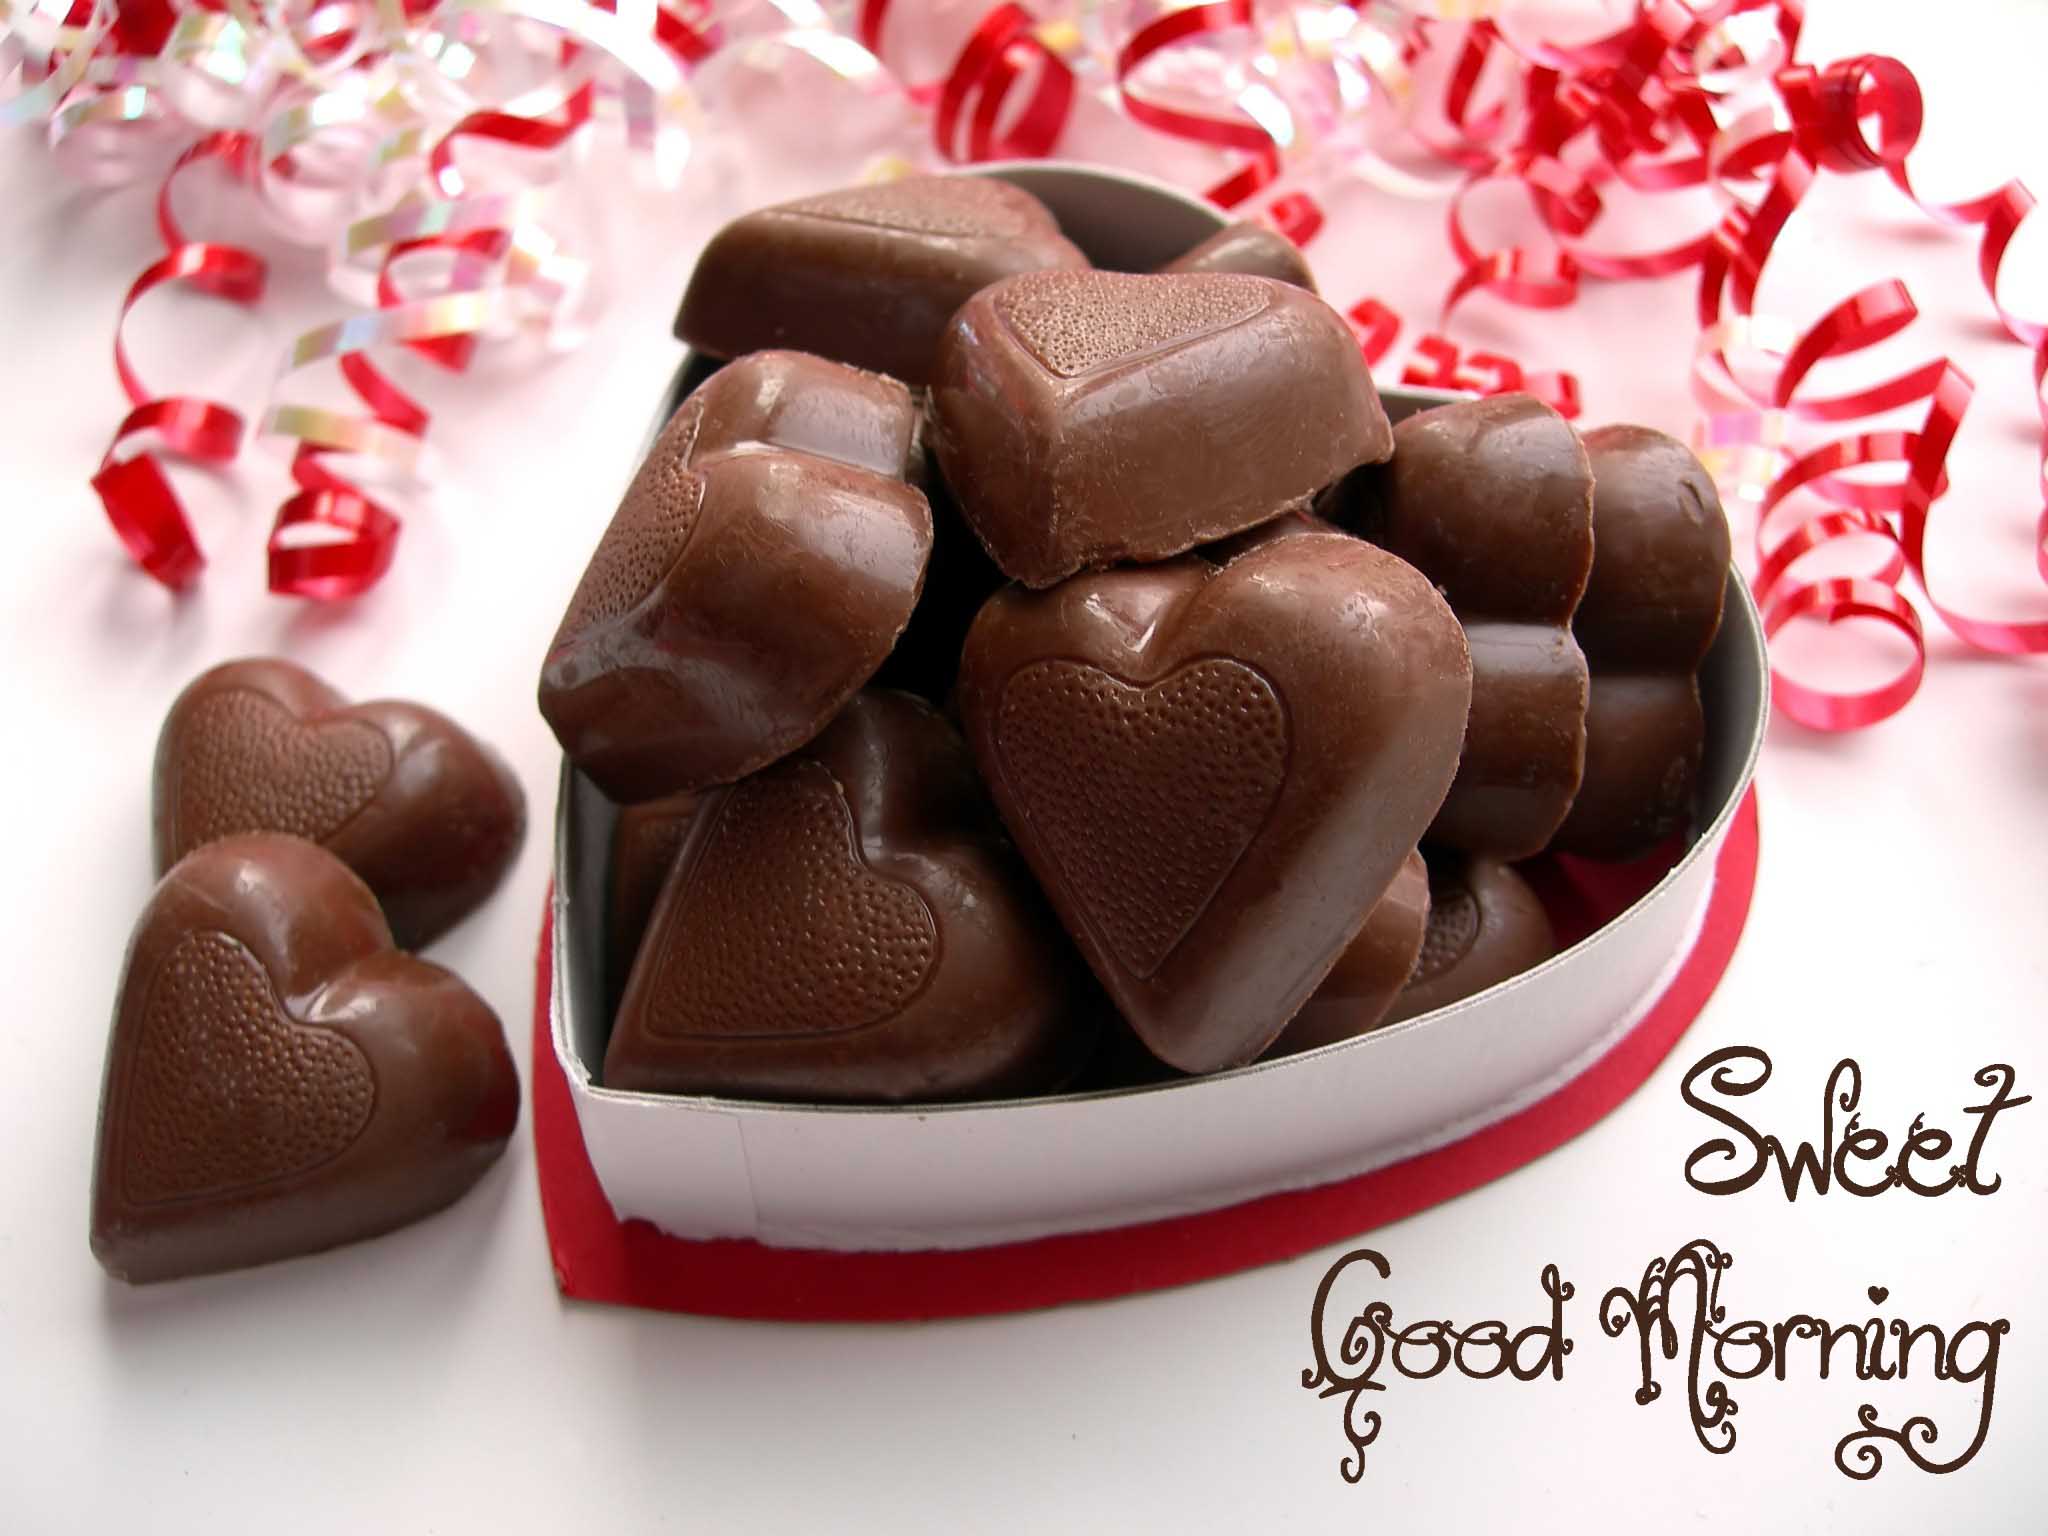 Latest Good Morning Wishes With Sweets And Choco Image Wallpaper